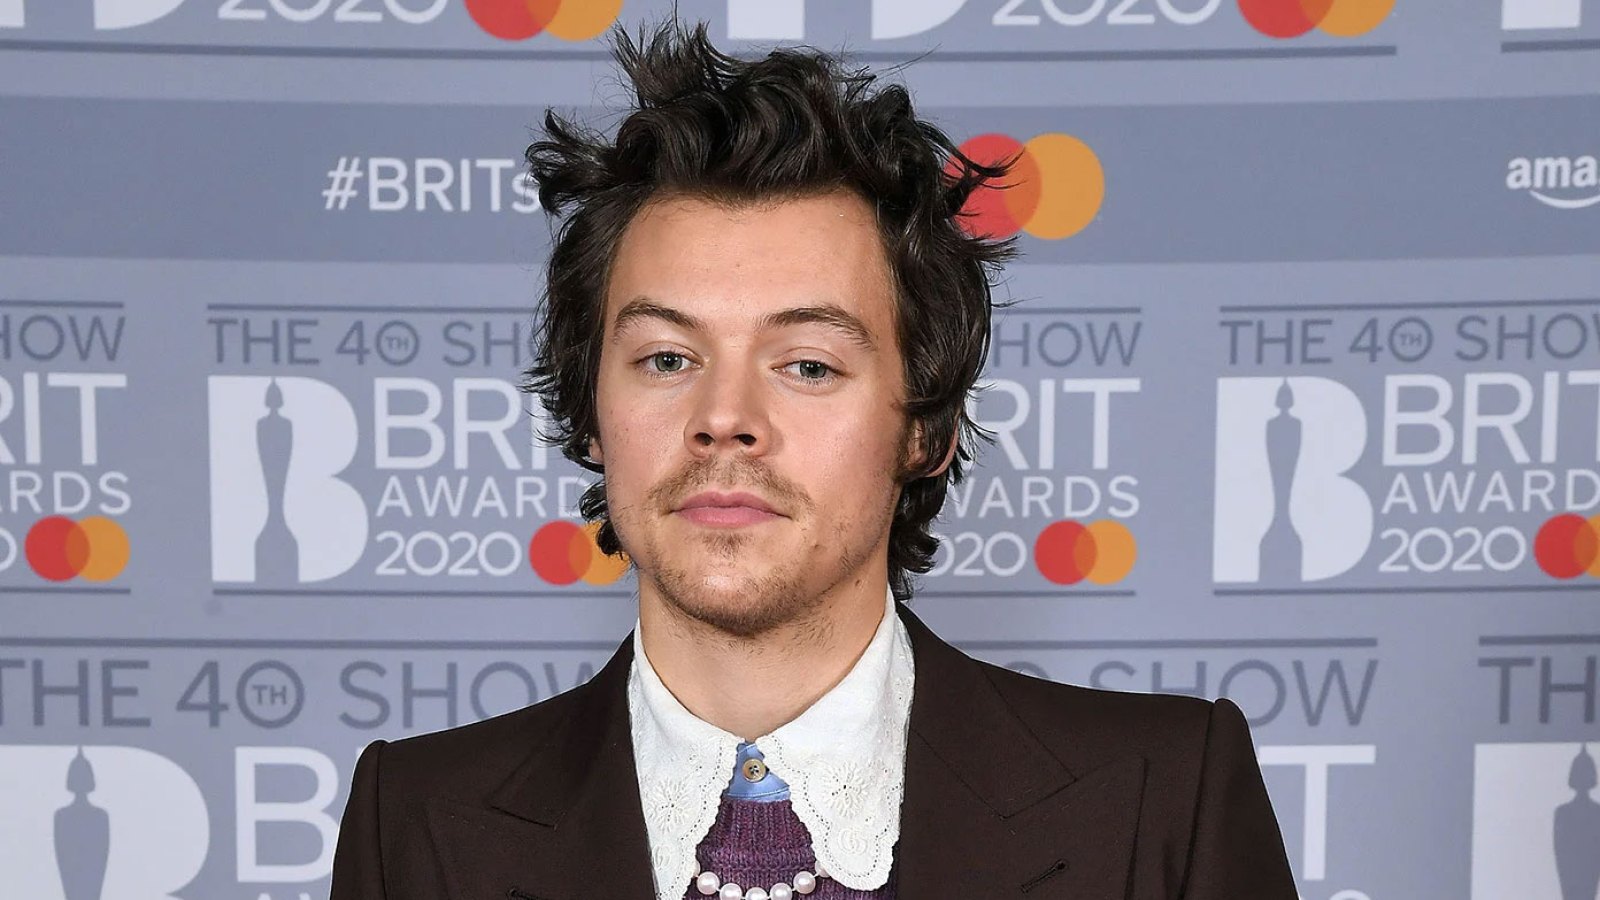 Harry Styles Recalls Sexuality Stressing Him Out